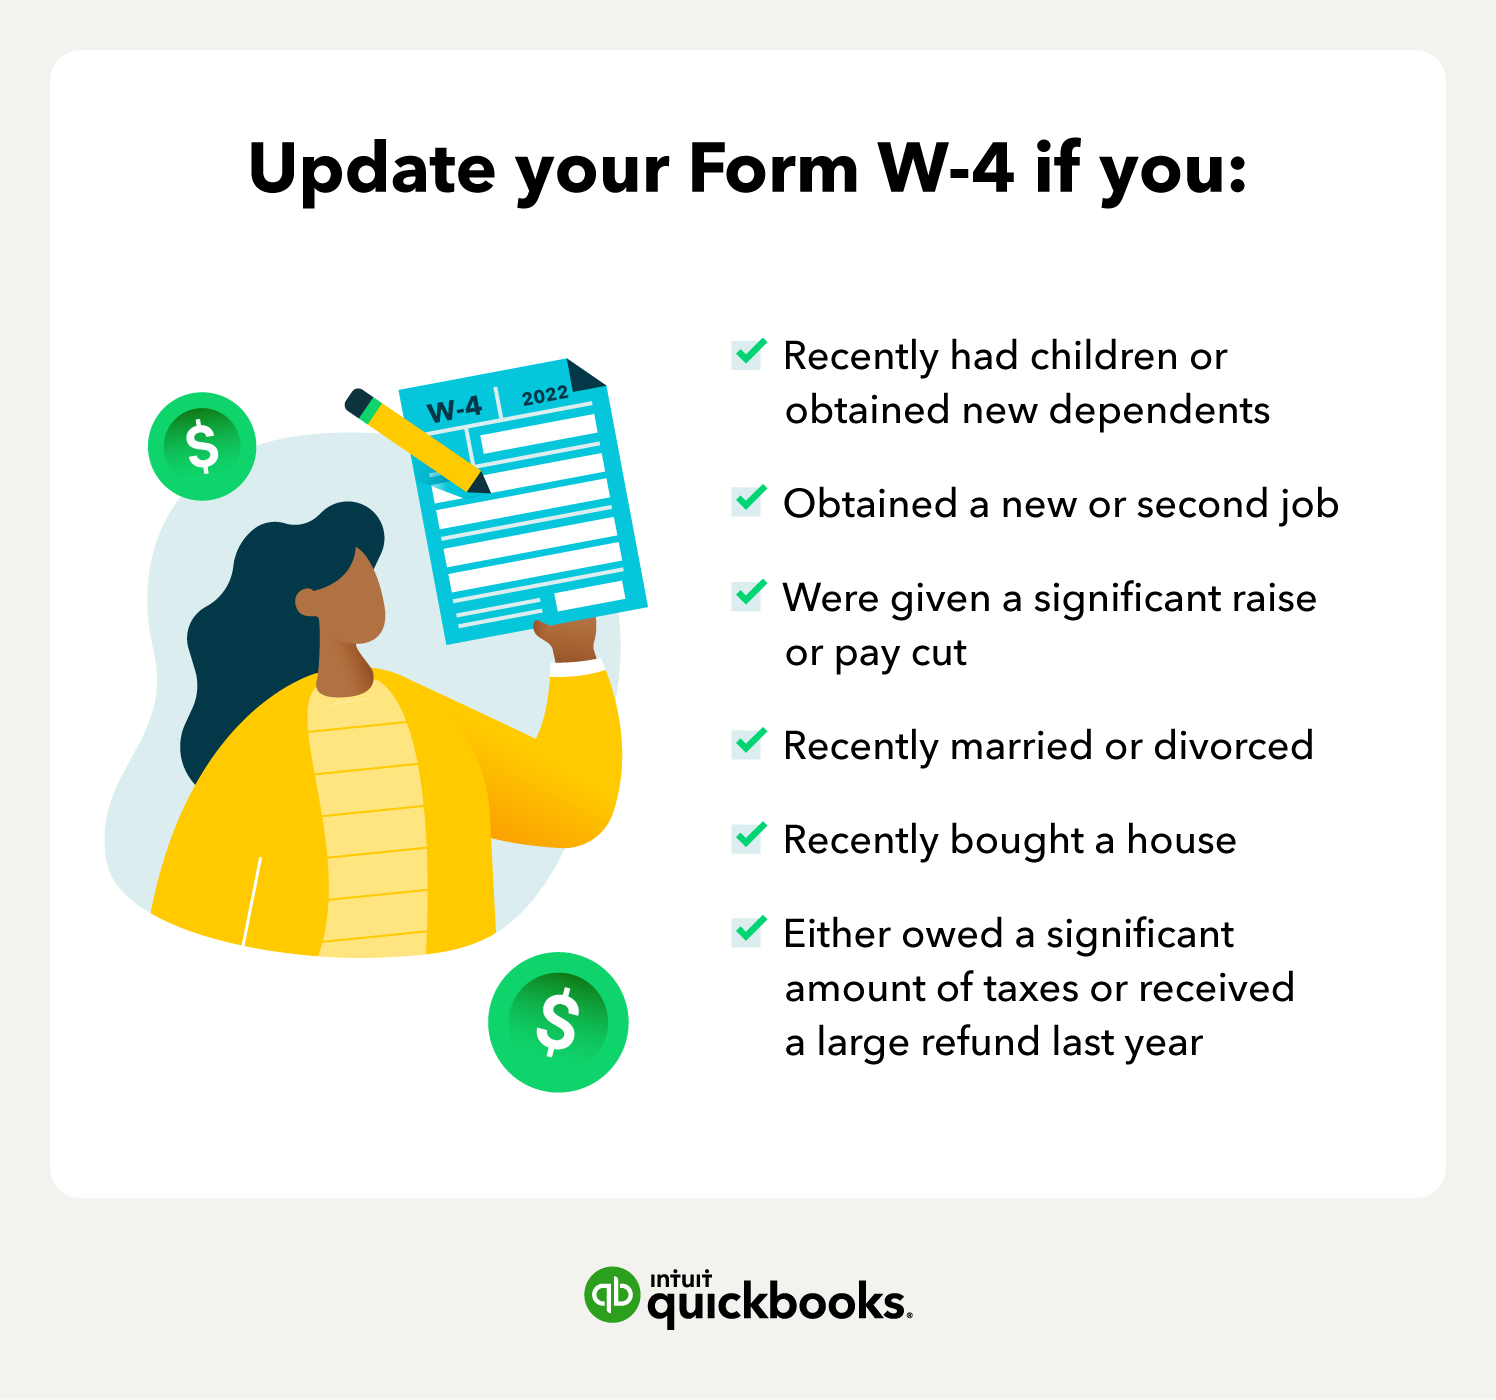 Update your W-4 if you recently were married or divorced, received a large raise or pay cut, had children, or obtained new dependents.